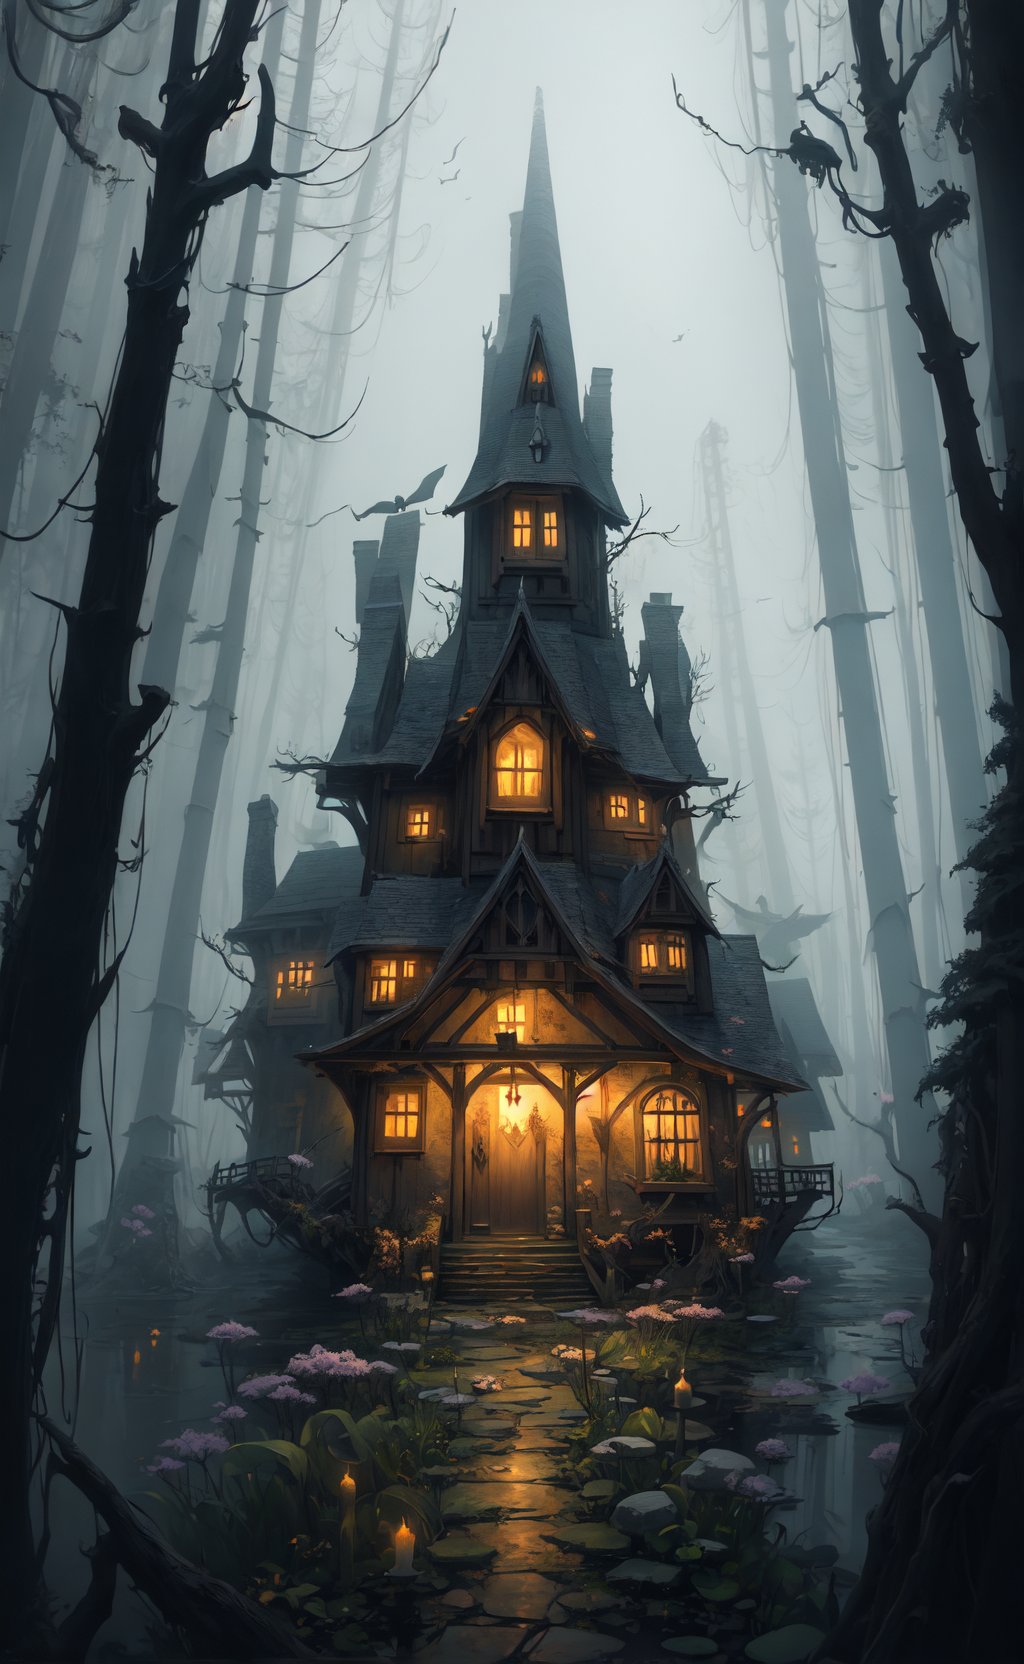 masterpiece, best quality, beautiful oil painting illustration, eerie witch cottage deep in a magical forest, dark, moody, mysterious